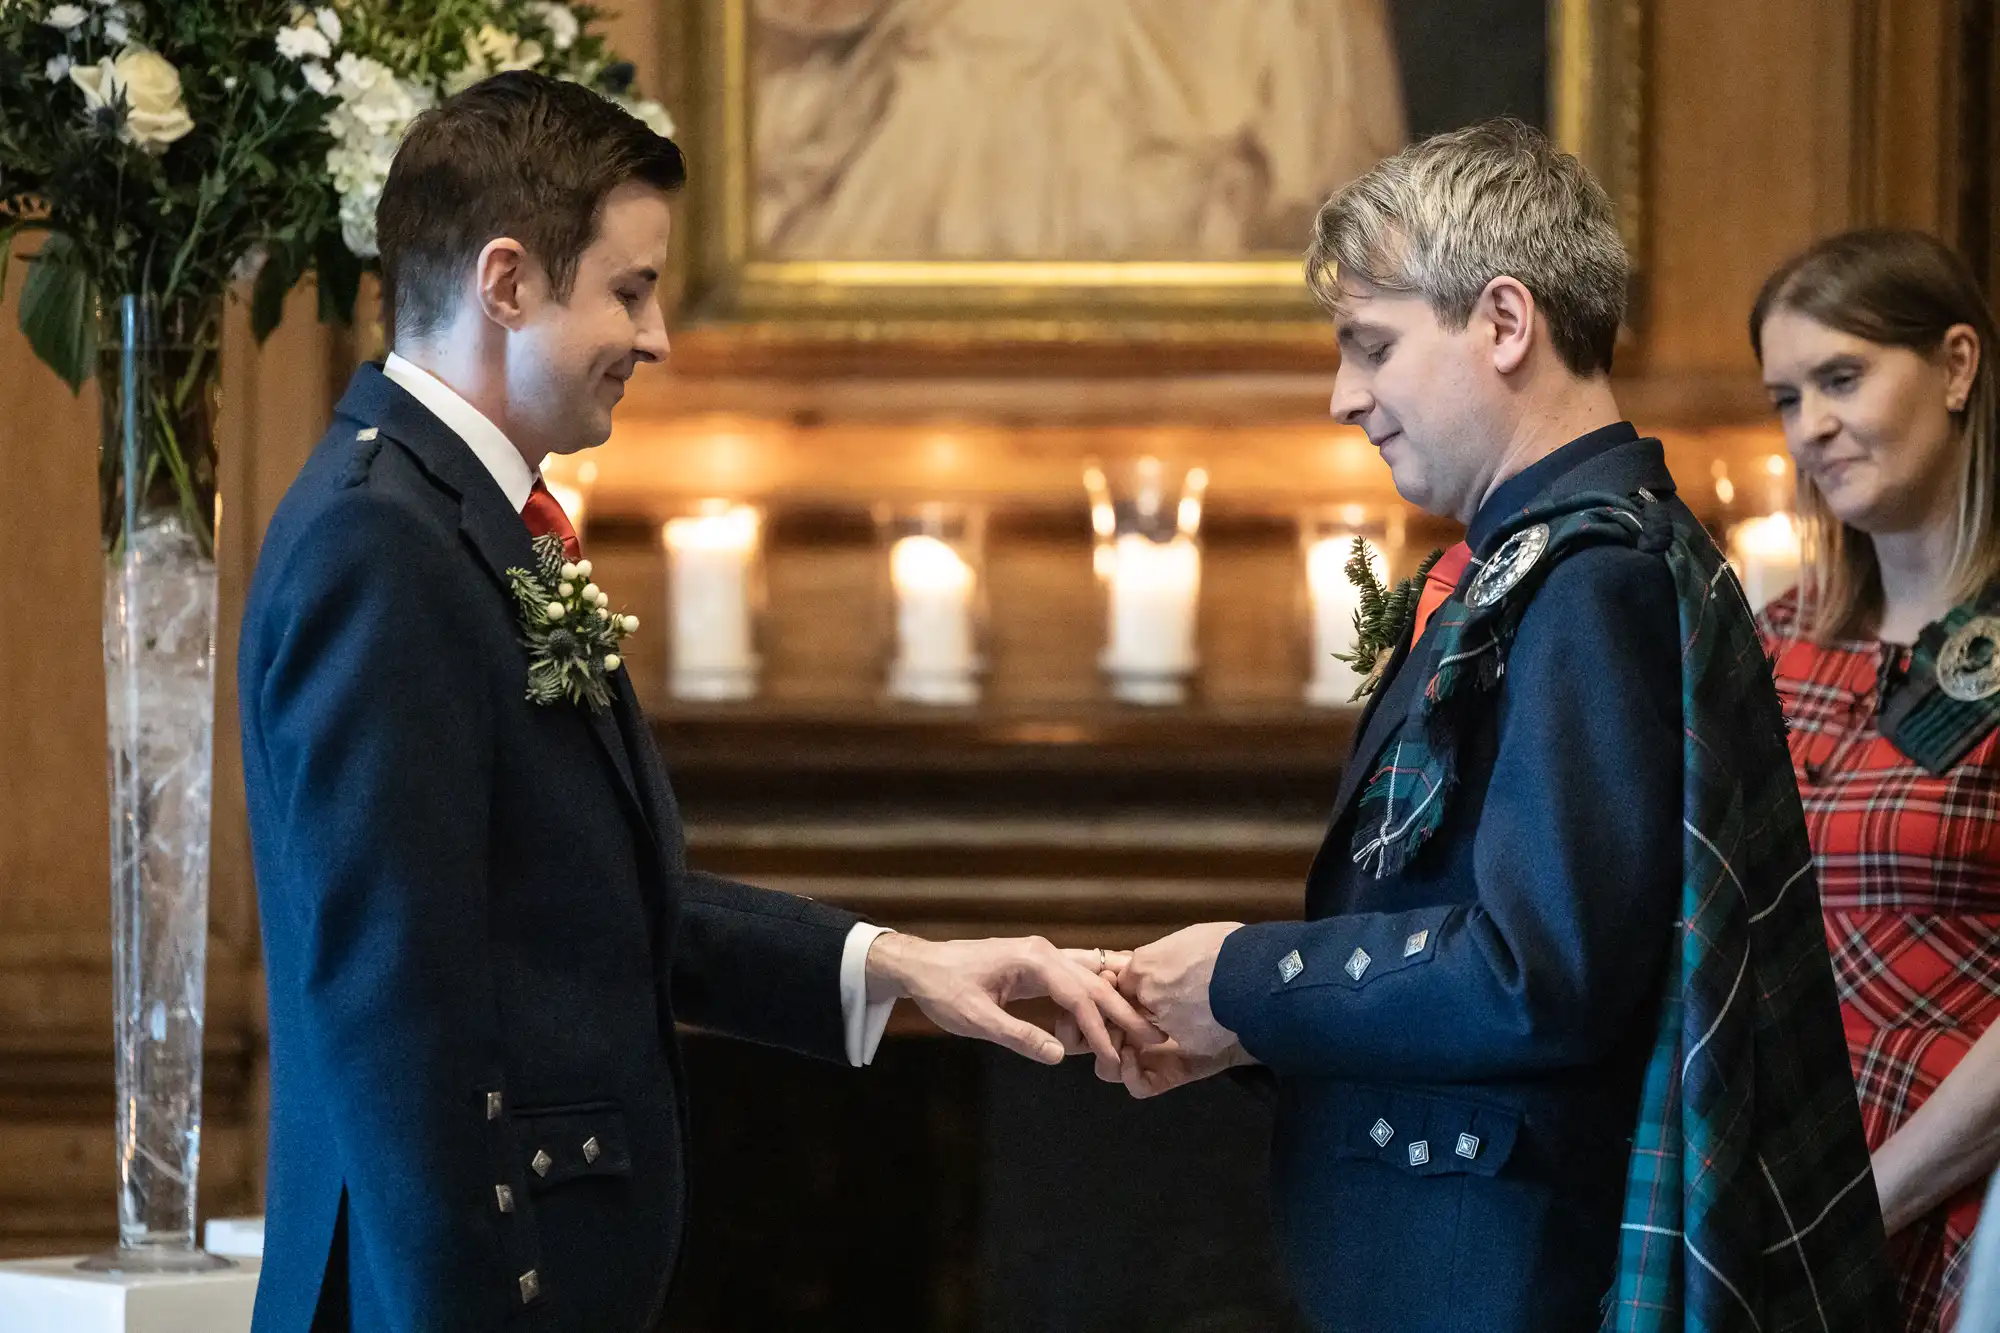 Two men in formal attire exchange rings in a wedding ceremony. A woman in a plaid dress stands in the background, and candles are lit on the mantle behind them.